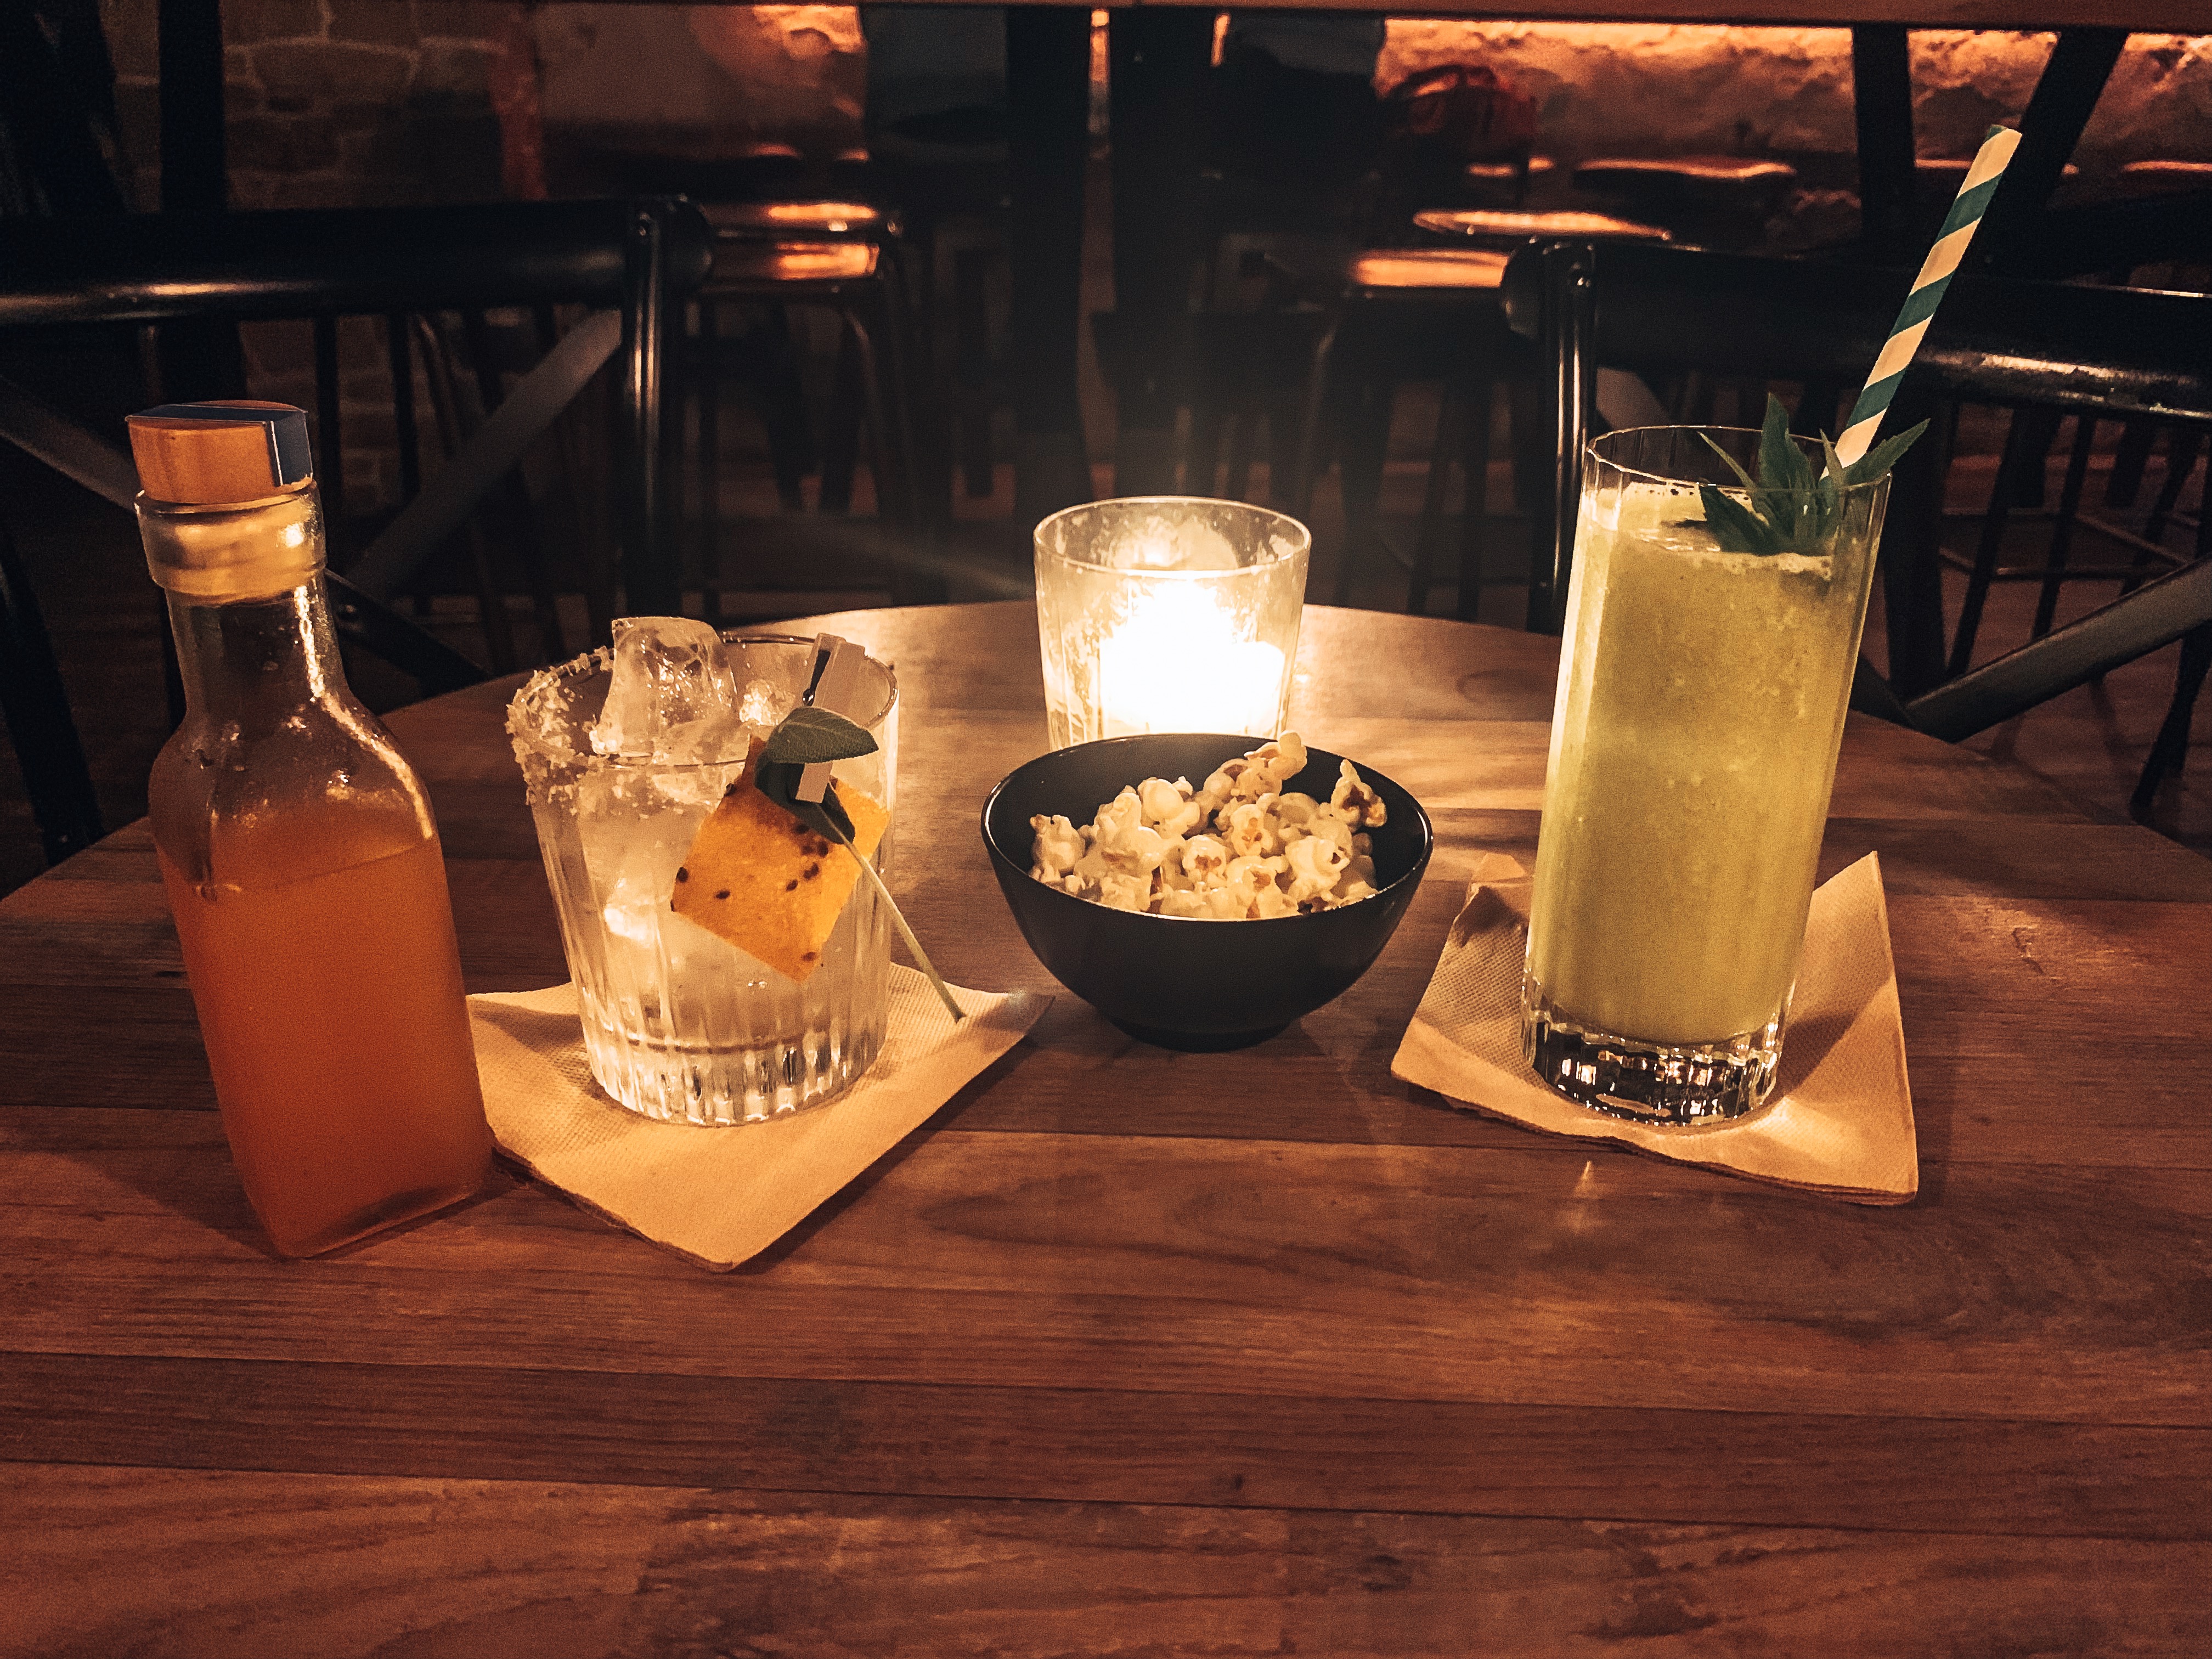 Cocktails on a candlelit table with a small bowl of popcorn